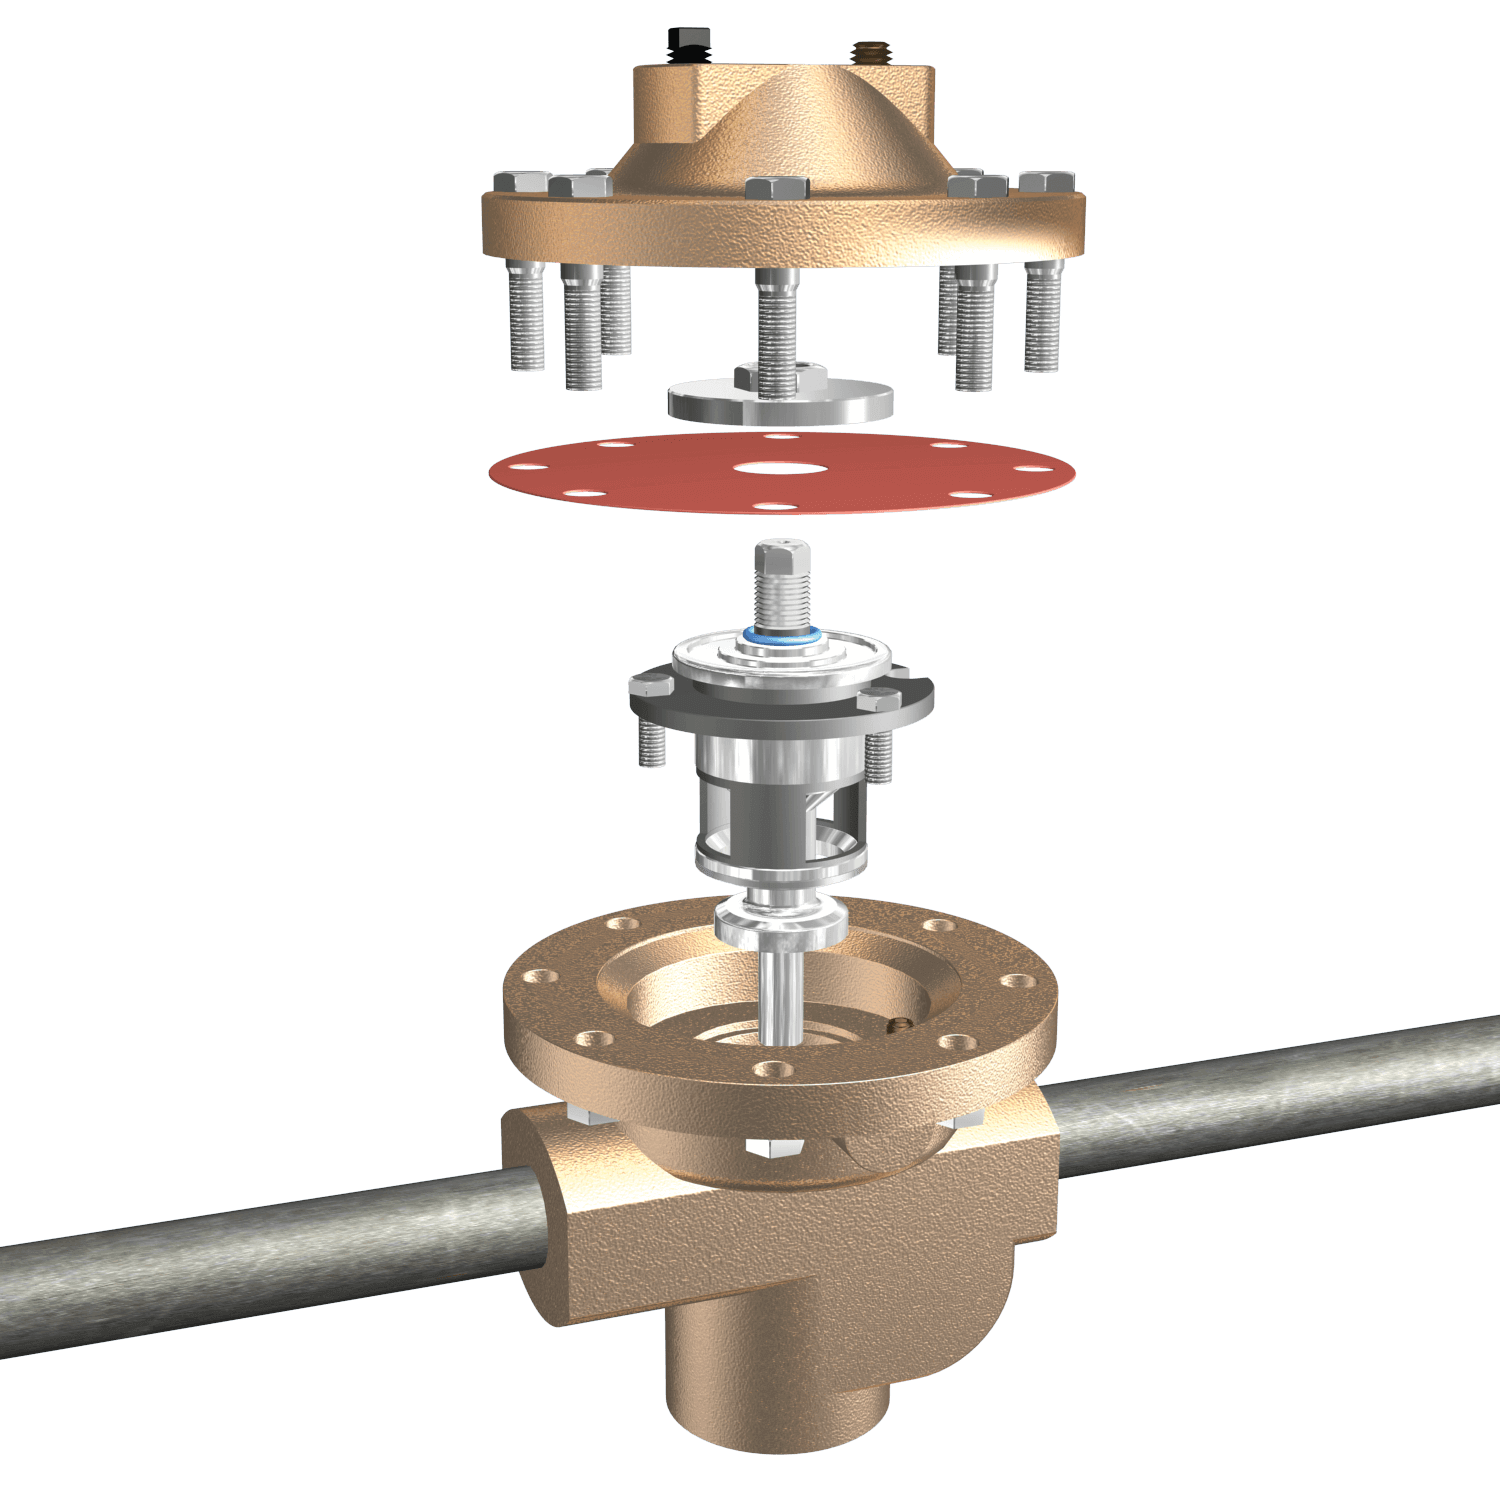 Saturated Steam Control Valves